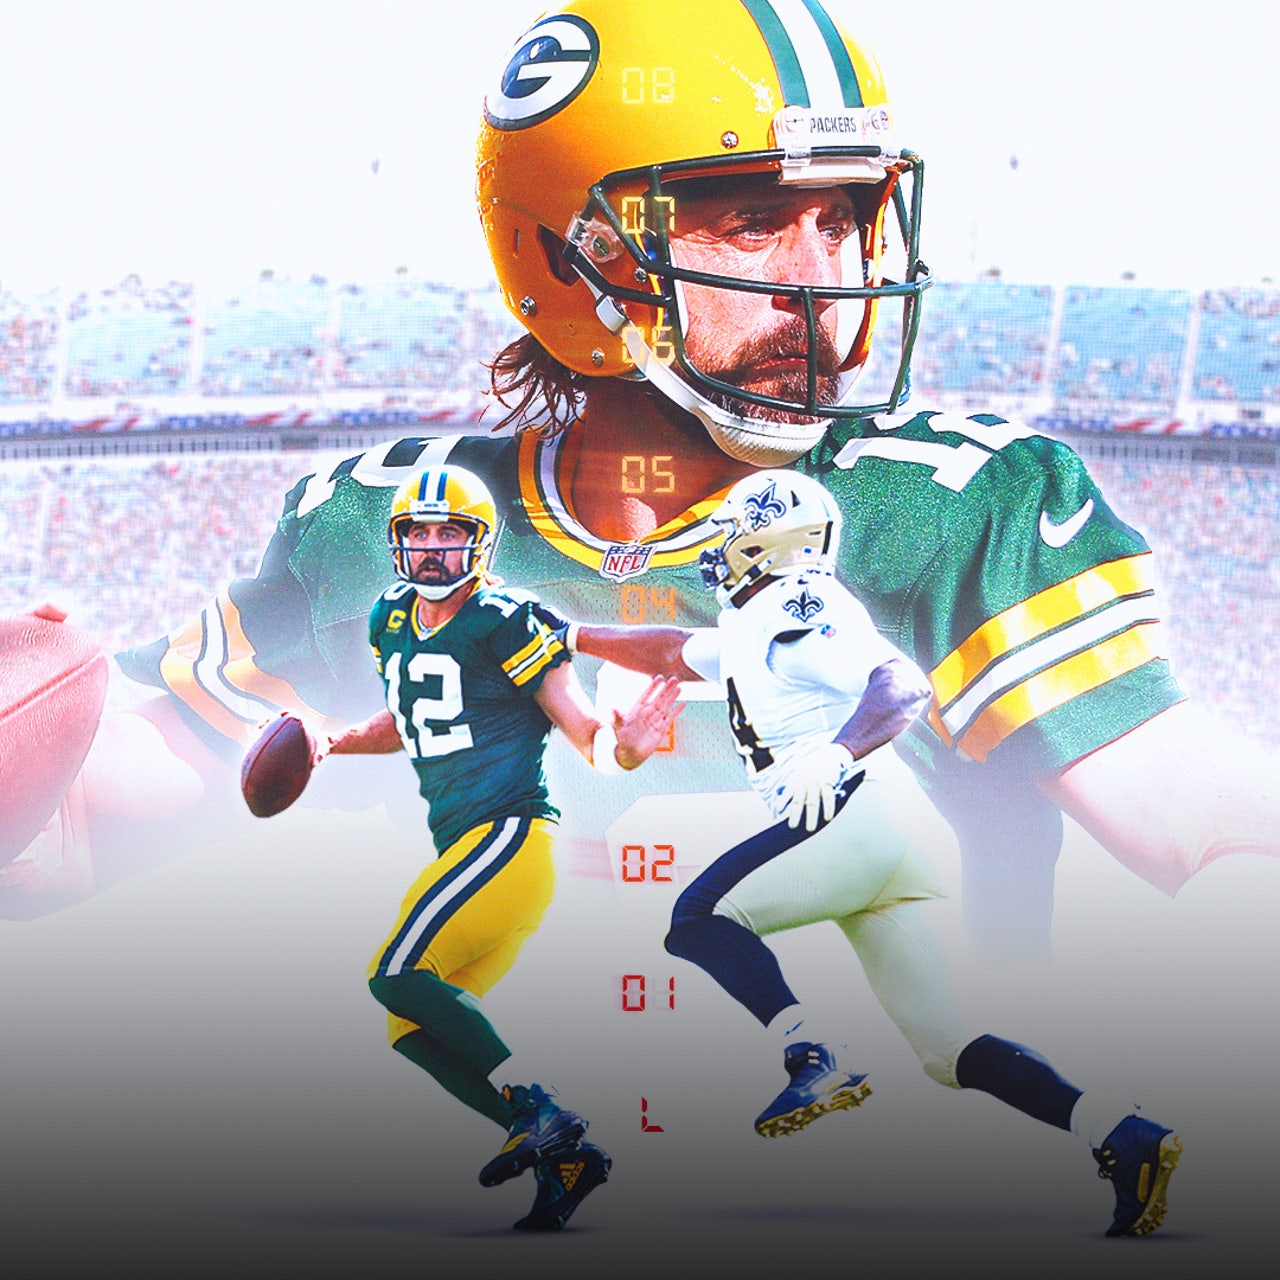 NFL Week 1 storylines: Aaron Rodgers debut, Detroit Lions and more